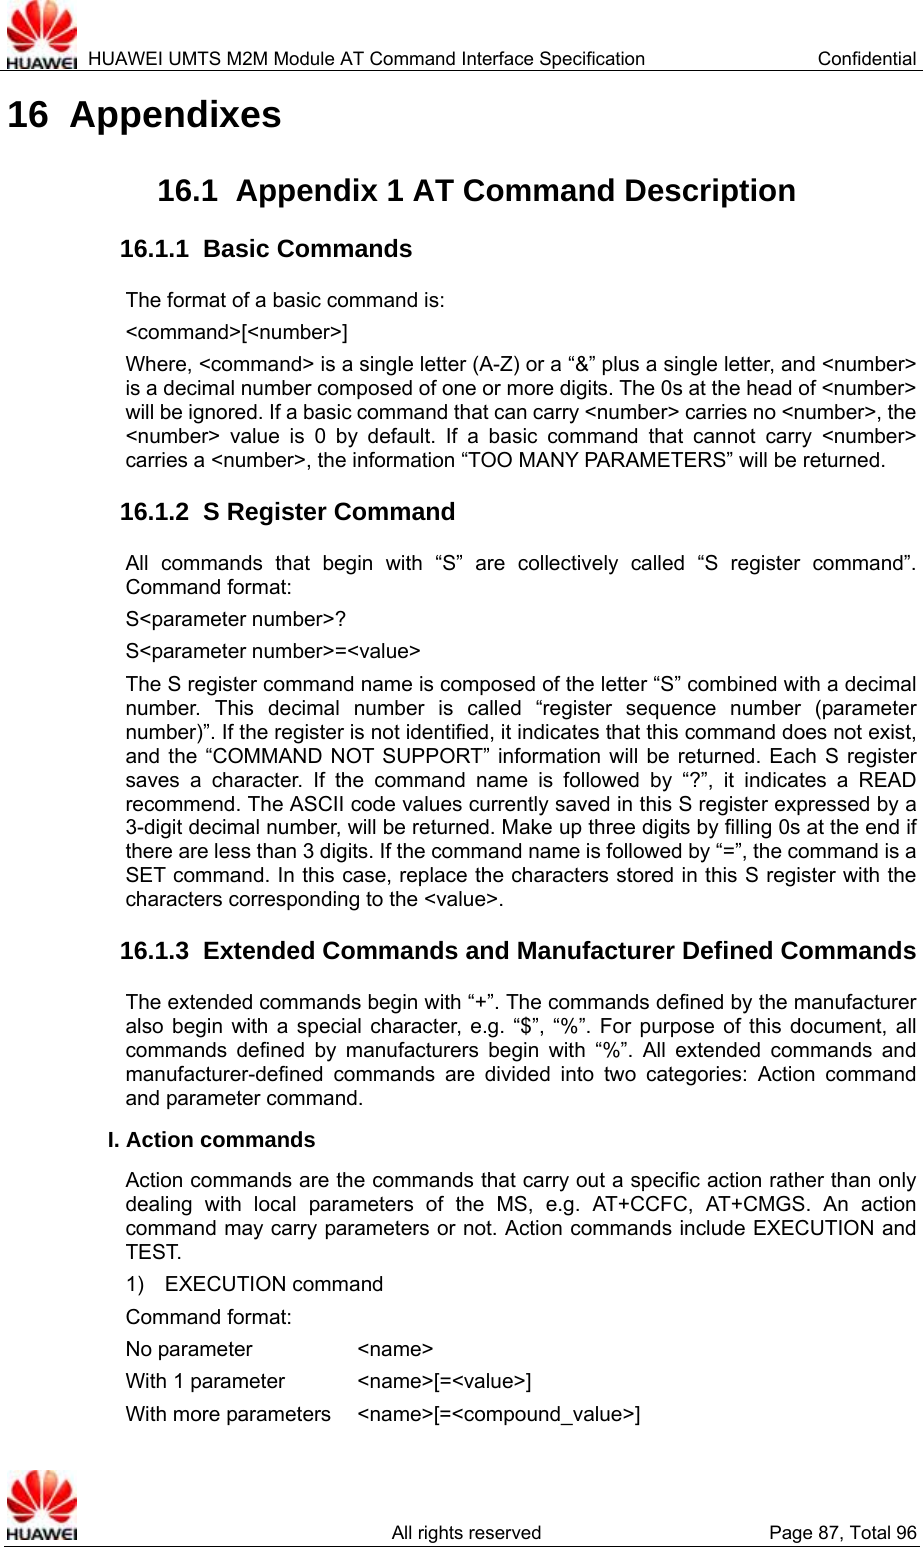  HUAWEI UMTS M2M Module AT Command Interface Specification  Confidential   All rights reserved  Page 87, Total 96 16  Appendixes 16.1  Appendix 1 AT Command Description   16.1.1  Basic Commands   The format of a basic command is:     &lt;command&gt;[&lt;number&gt;] Where, &lt;command&gt; is a single letter (A-Z) or a “&amp;” plus a single letter, and &lt;number&gt; is a decimal number composed of one or more digits. The 0s at the head of &lt;number&gt; will be ignored. If a basic command that can carry &lt;number&gt; carries no &lt;number&gt;, the &lt;number&gt; value is 0 by default. If a basic command that cannot carry &lt;number&gt; carries a &lt;number&gt;, the information “TOO MANY PARAMETERS” will be returned.   16.1.2  S Register Command All commands that begin with “S” are collectively called “S register command”. Command format:   S&lt;parameter number&gt;? S&lt;parameter number&gt;=&lt;value&gt; The S register command name is composed of the letter “S” combined with a decimal number. This decimal number is called “register sequence number (parameter number)”. If the register is not identified, it indicates that this command does not exist, and the “COMMAND NOT SUPPORT” information will be returned. Each S register saves a character. If the command name is followed by “?”, it indicates a READ recommend. The ASCII code values currently saved in this S register expressed by a 3-digit decimal number, will be returned. Make up three digits by filling 0s at the end if there are less than 3 digits. If the command name is followed by “=”, the command is a SET command. In this case, replace the characters stored in this S register with the characters corresponding to the &lt;value&gt;.   16.1.3  Extended Commands and Manufacturer Defined Commands The extended commands begin with “+”. The commands defined by the manufacturer also begin with a special character, e.g. “$”, “%”. For purpose of this document, all commands defined by manufacturers begin with “%”. All extended commands and manufacturer-defined commands are divided into two categories: Action command and parameter command.   I. Action commands   Action commands are the commands that carry out a specific action rather than only dealing with local parameters of the MS, e.g. AT+CCFC, AT+CMGS. An action command may carry parameters or not. Action commands include EXECUTION and TEST.  1)  EXECUTION command Command format:   No parameter       &lt;name&gt; With 1 parameter    &lt;name&gt;[=&lt;value&gt;] With more parameters  &lt;name&gt;[=&lt;compound_value&gt;] 